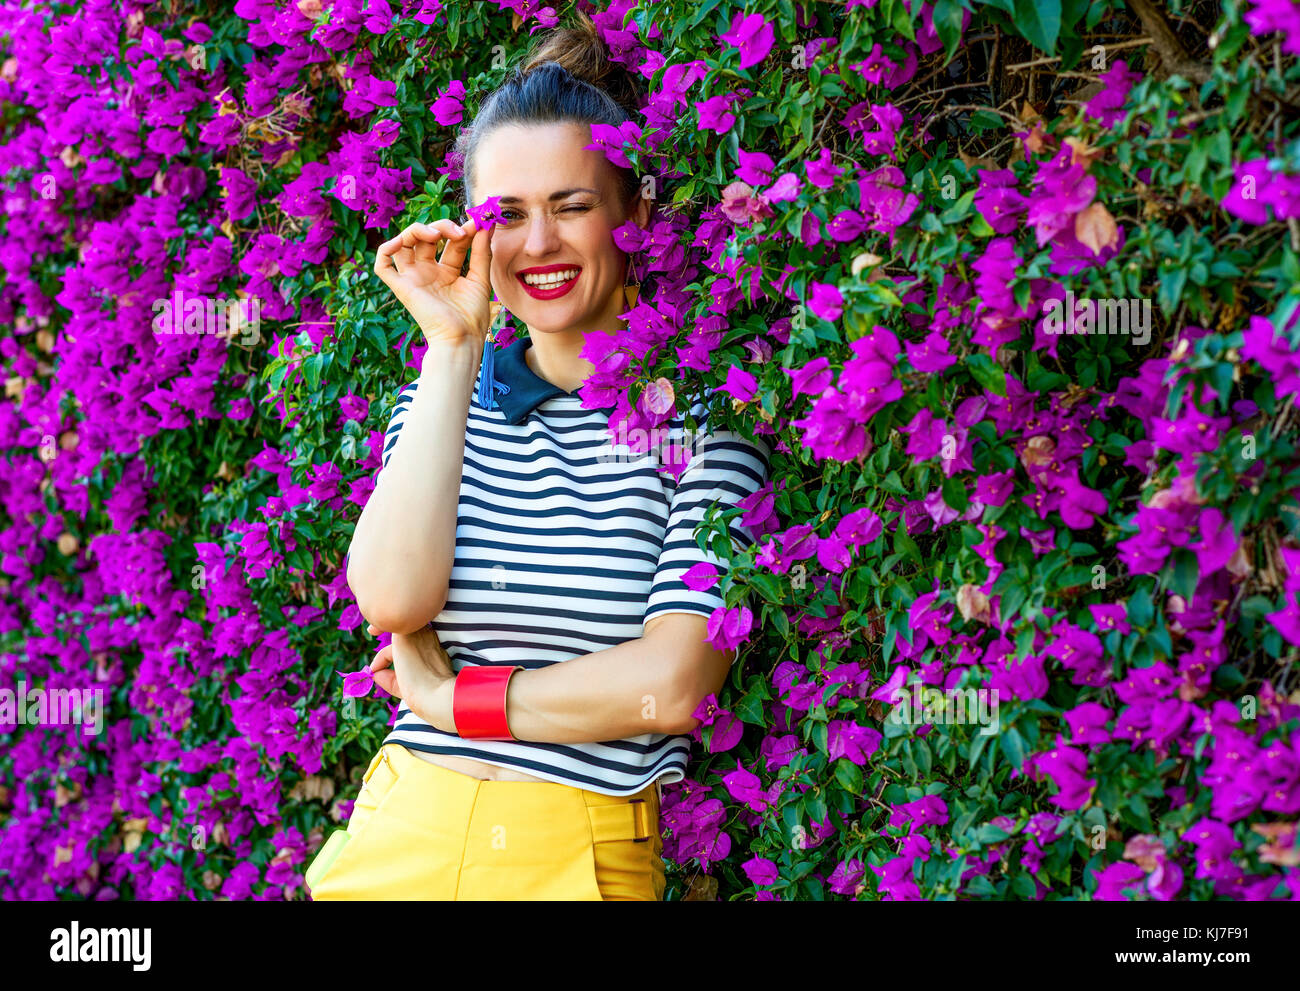 Colorful Freshness. happy stylish woman in yellow shorts and stripy shirt near colorful magenta flowers bed having fun time Stock Photo